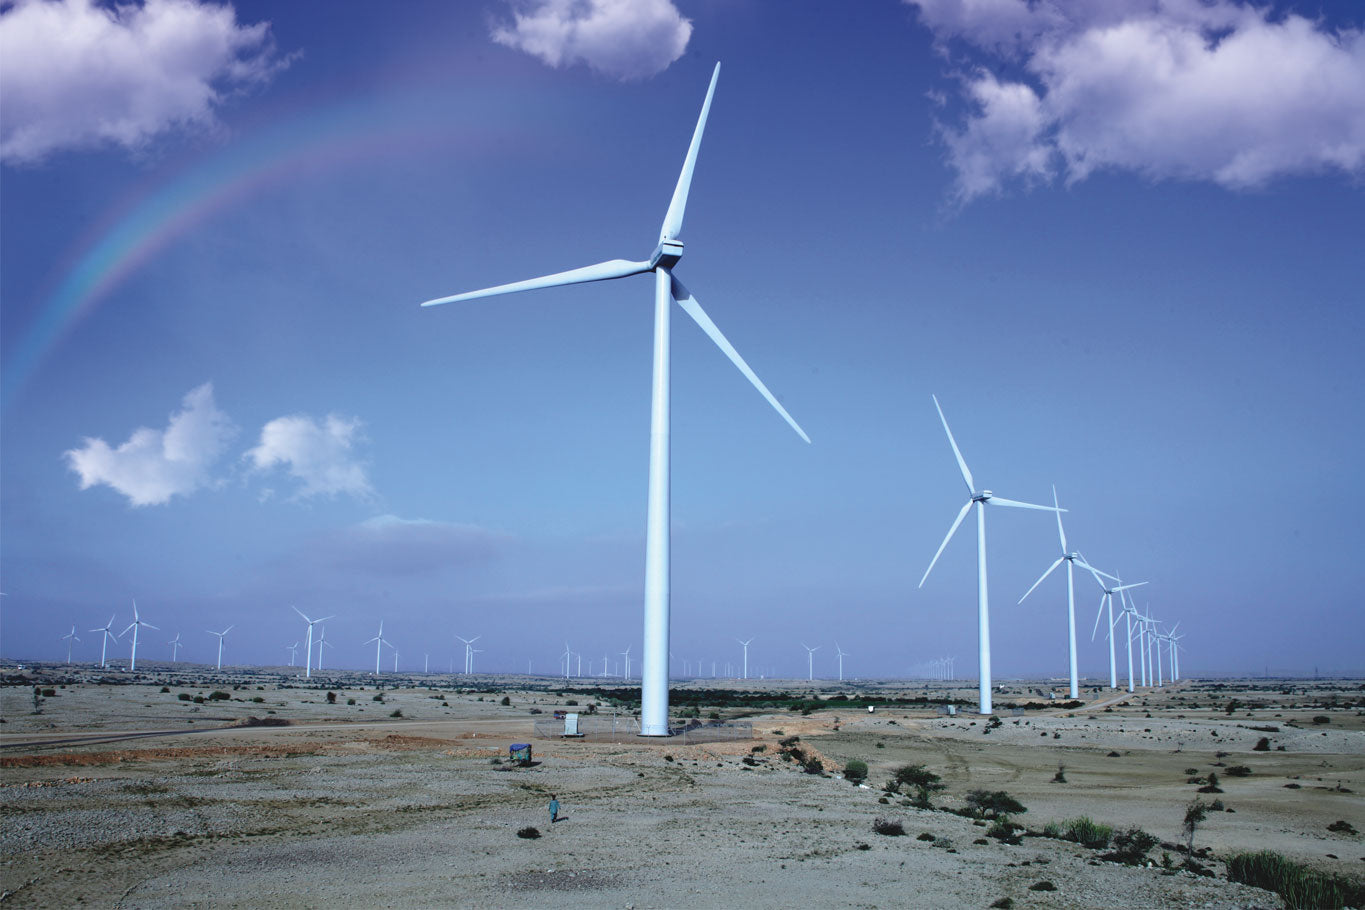 Master Wind Energy applies for listing on PSX